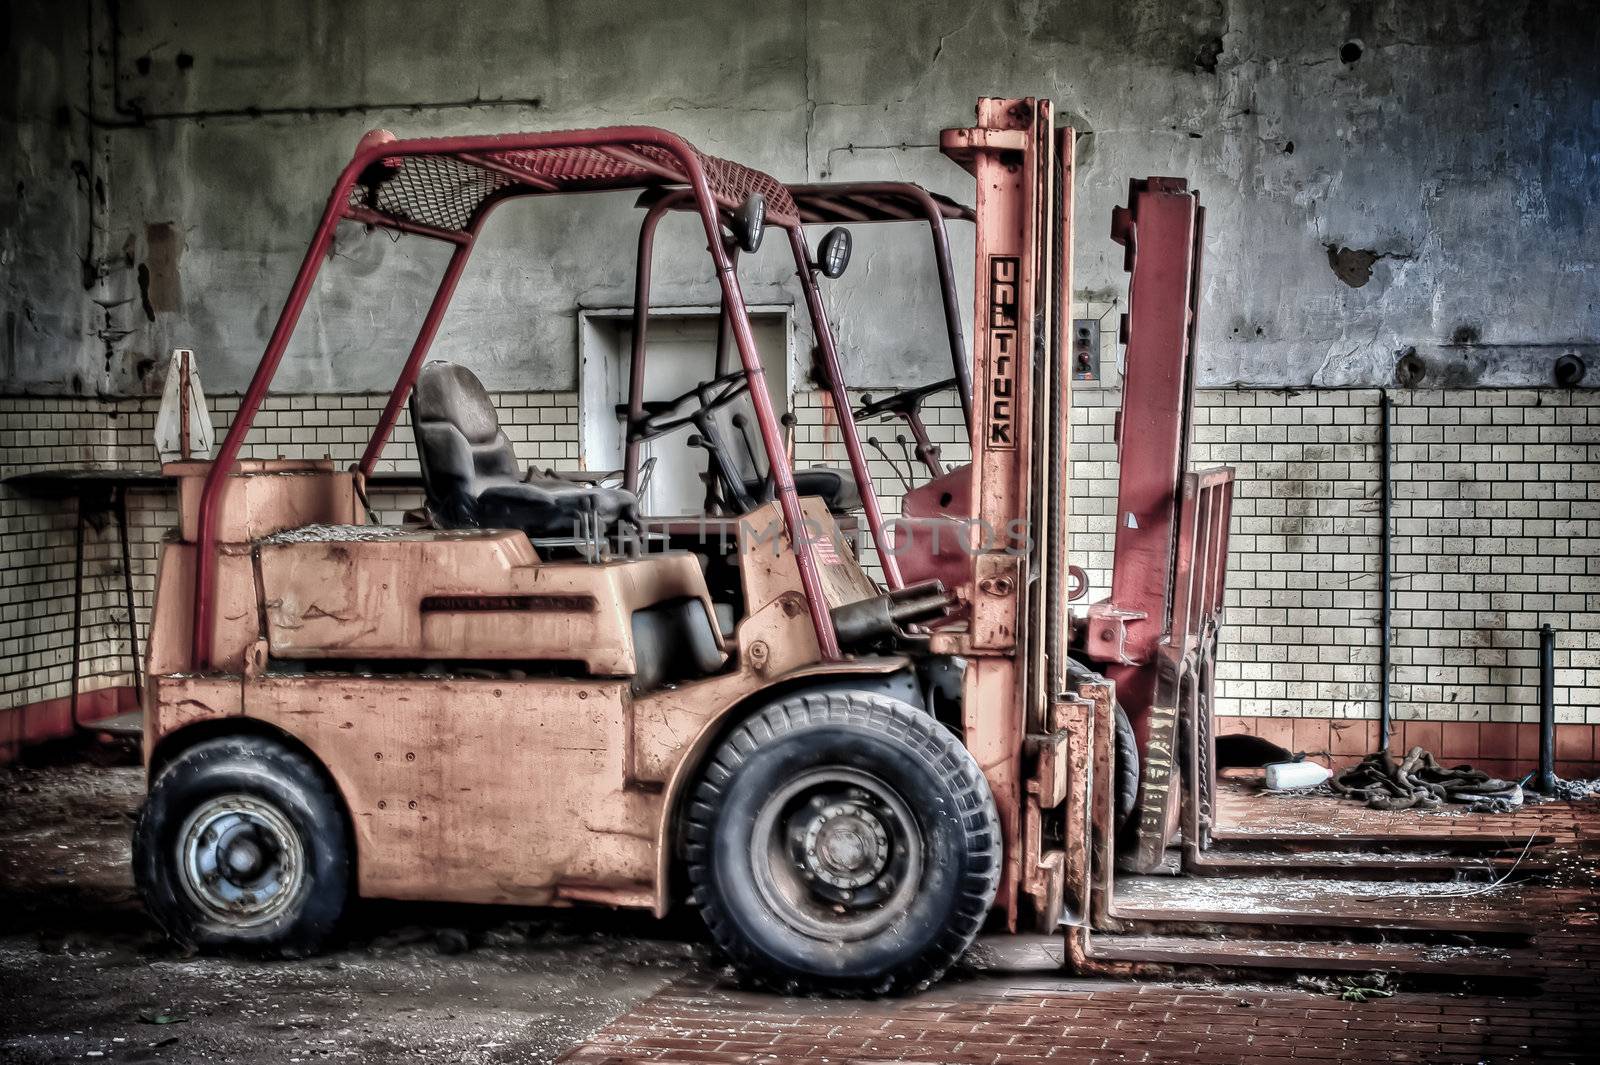 Abandoned Fork Lifts by lavsen